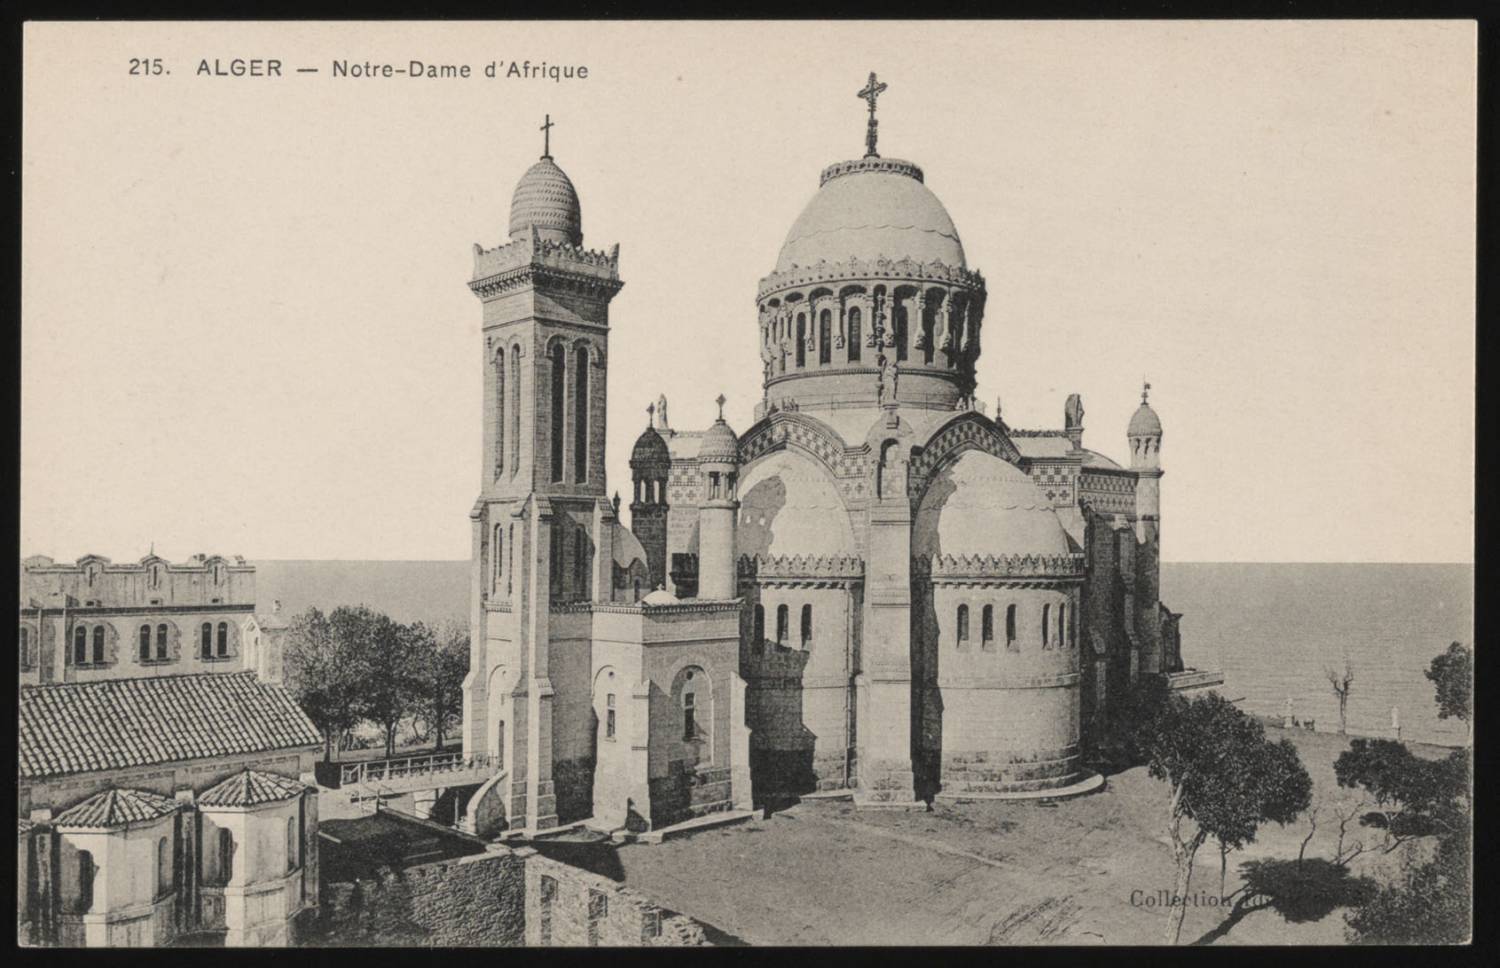 View of Our Lady of Afrique Basilica in Algiers